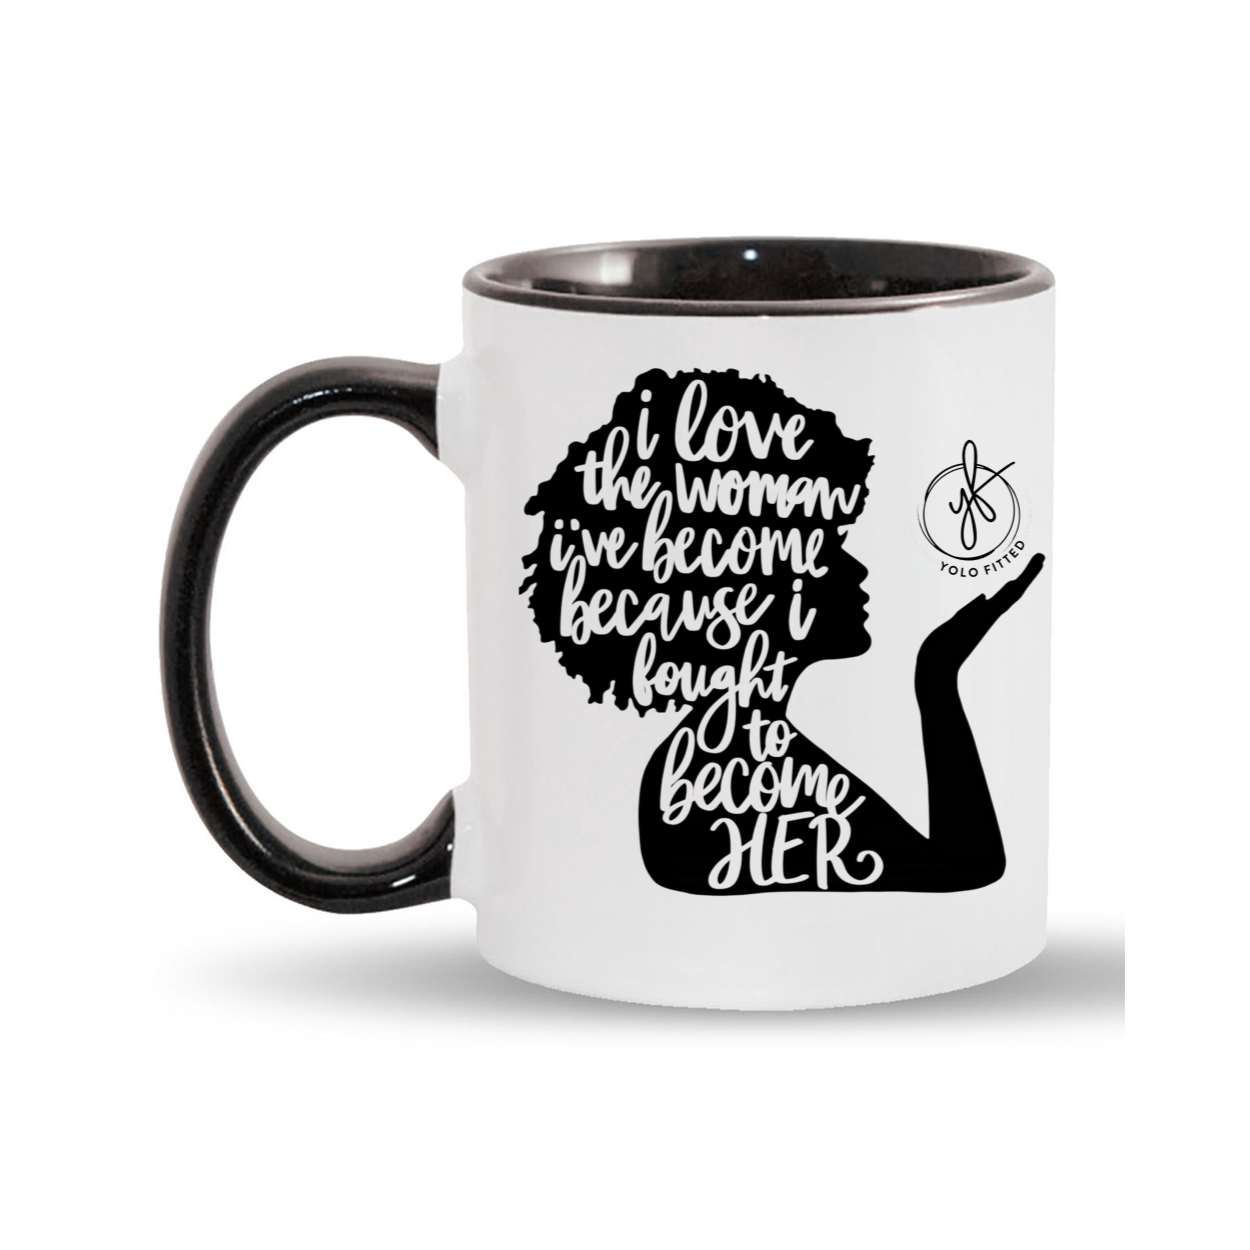 YOLO FITTED'S "WOMAN I HAVE BECOME" MUG - Yolofitted